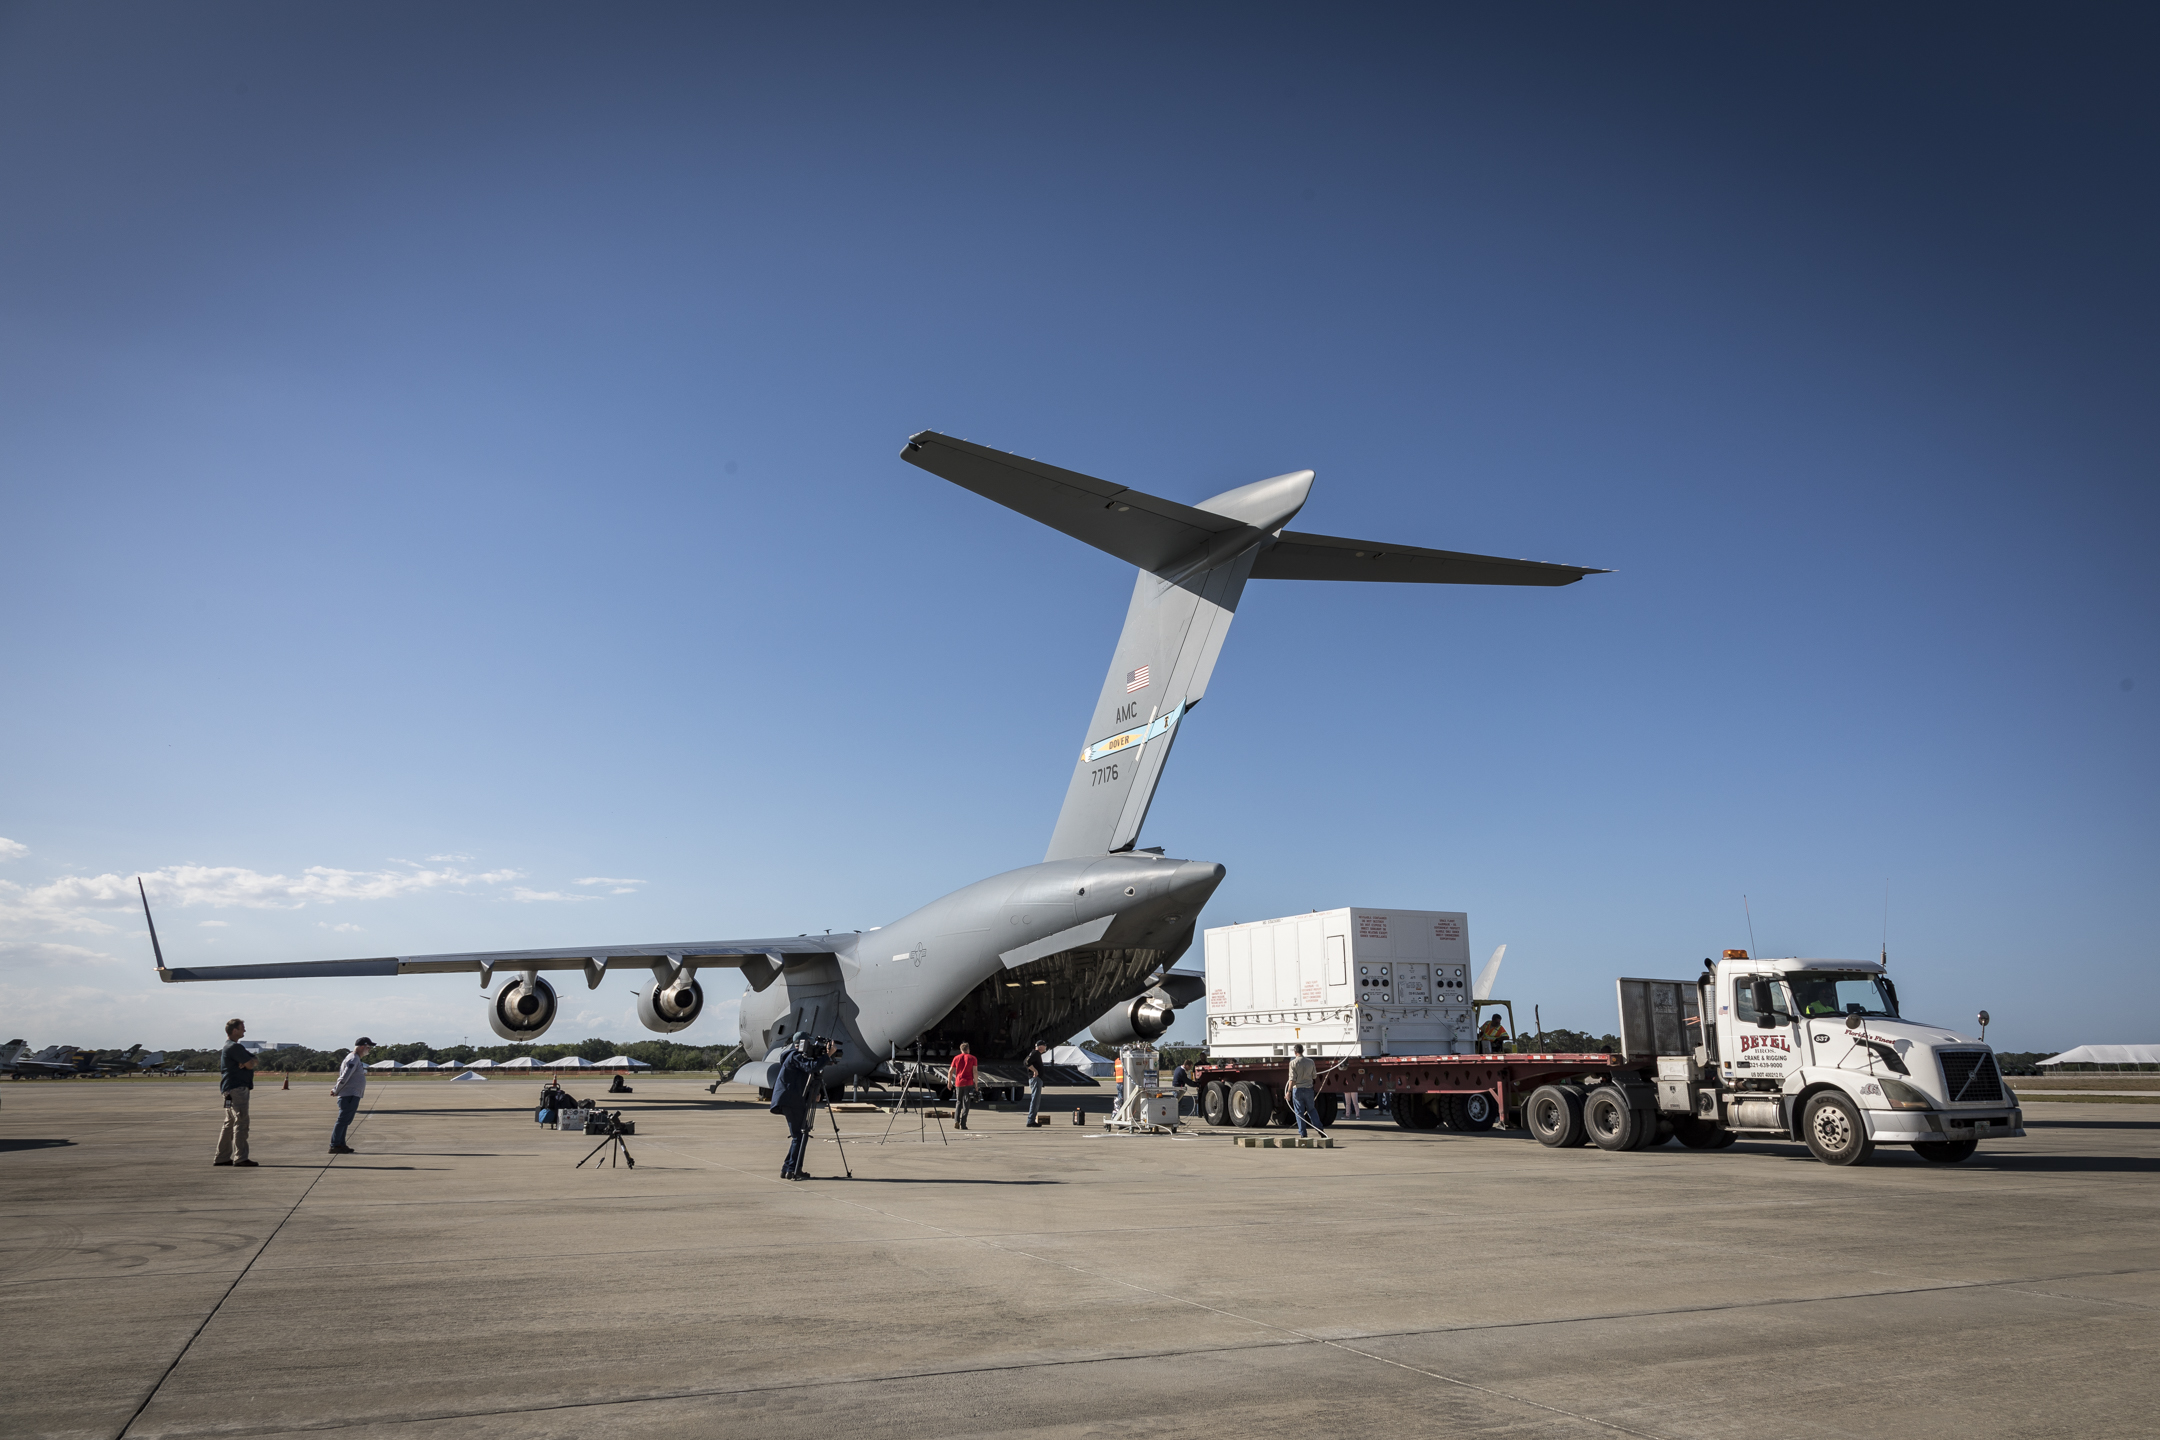 NASA’s Parker Solar Probe is loaded aboard a truck after being flown to Space Coast Regional Airport in Titusville, Florida, on the morning of April 3, 2018, by a C-17 from the United States Air Force’s 436th Airlift Wing. The spacecraft was taken to Astrotech Space Operations, also in Titusville, for pre-launch testing and preparations. 